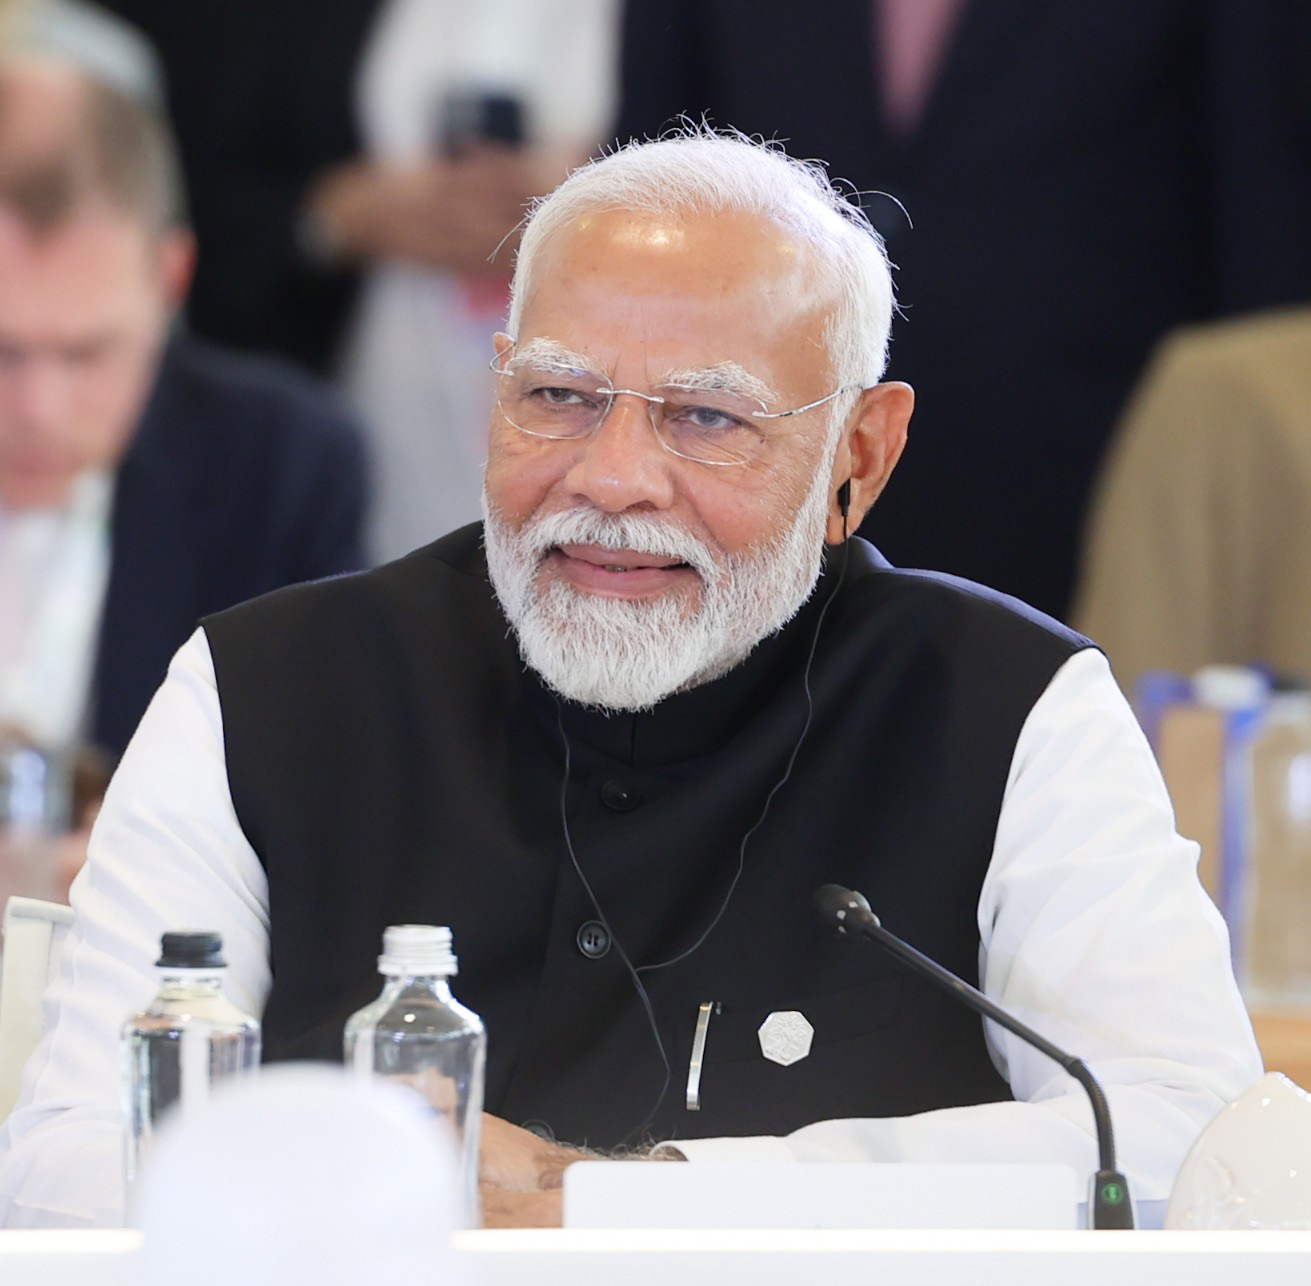 Prime Minister Narendra Modi has formed his maiden coalition government with the help of his allies - the Telugu Desam Party (TDP) and Janata Dal (United) (JDU). Both partners are seeking a lion's share which is likely to curtail the flamboyant characteristic that’s typical of brand Modi.